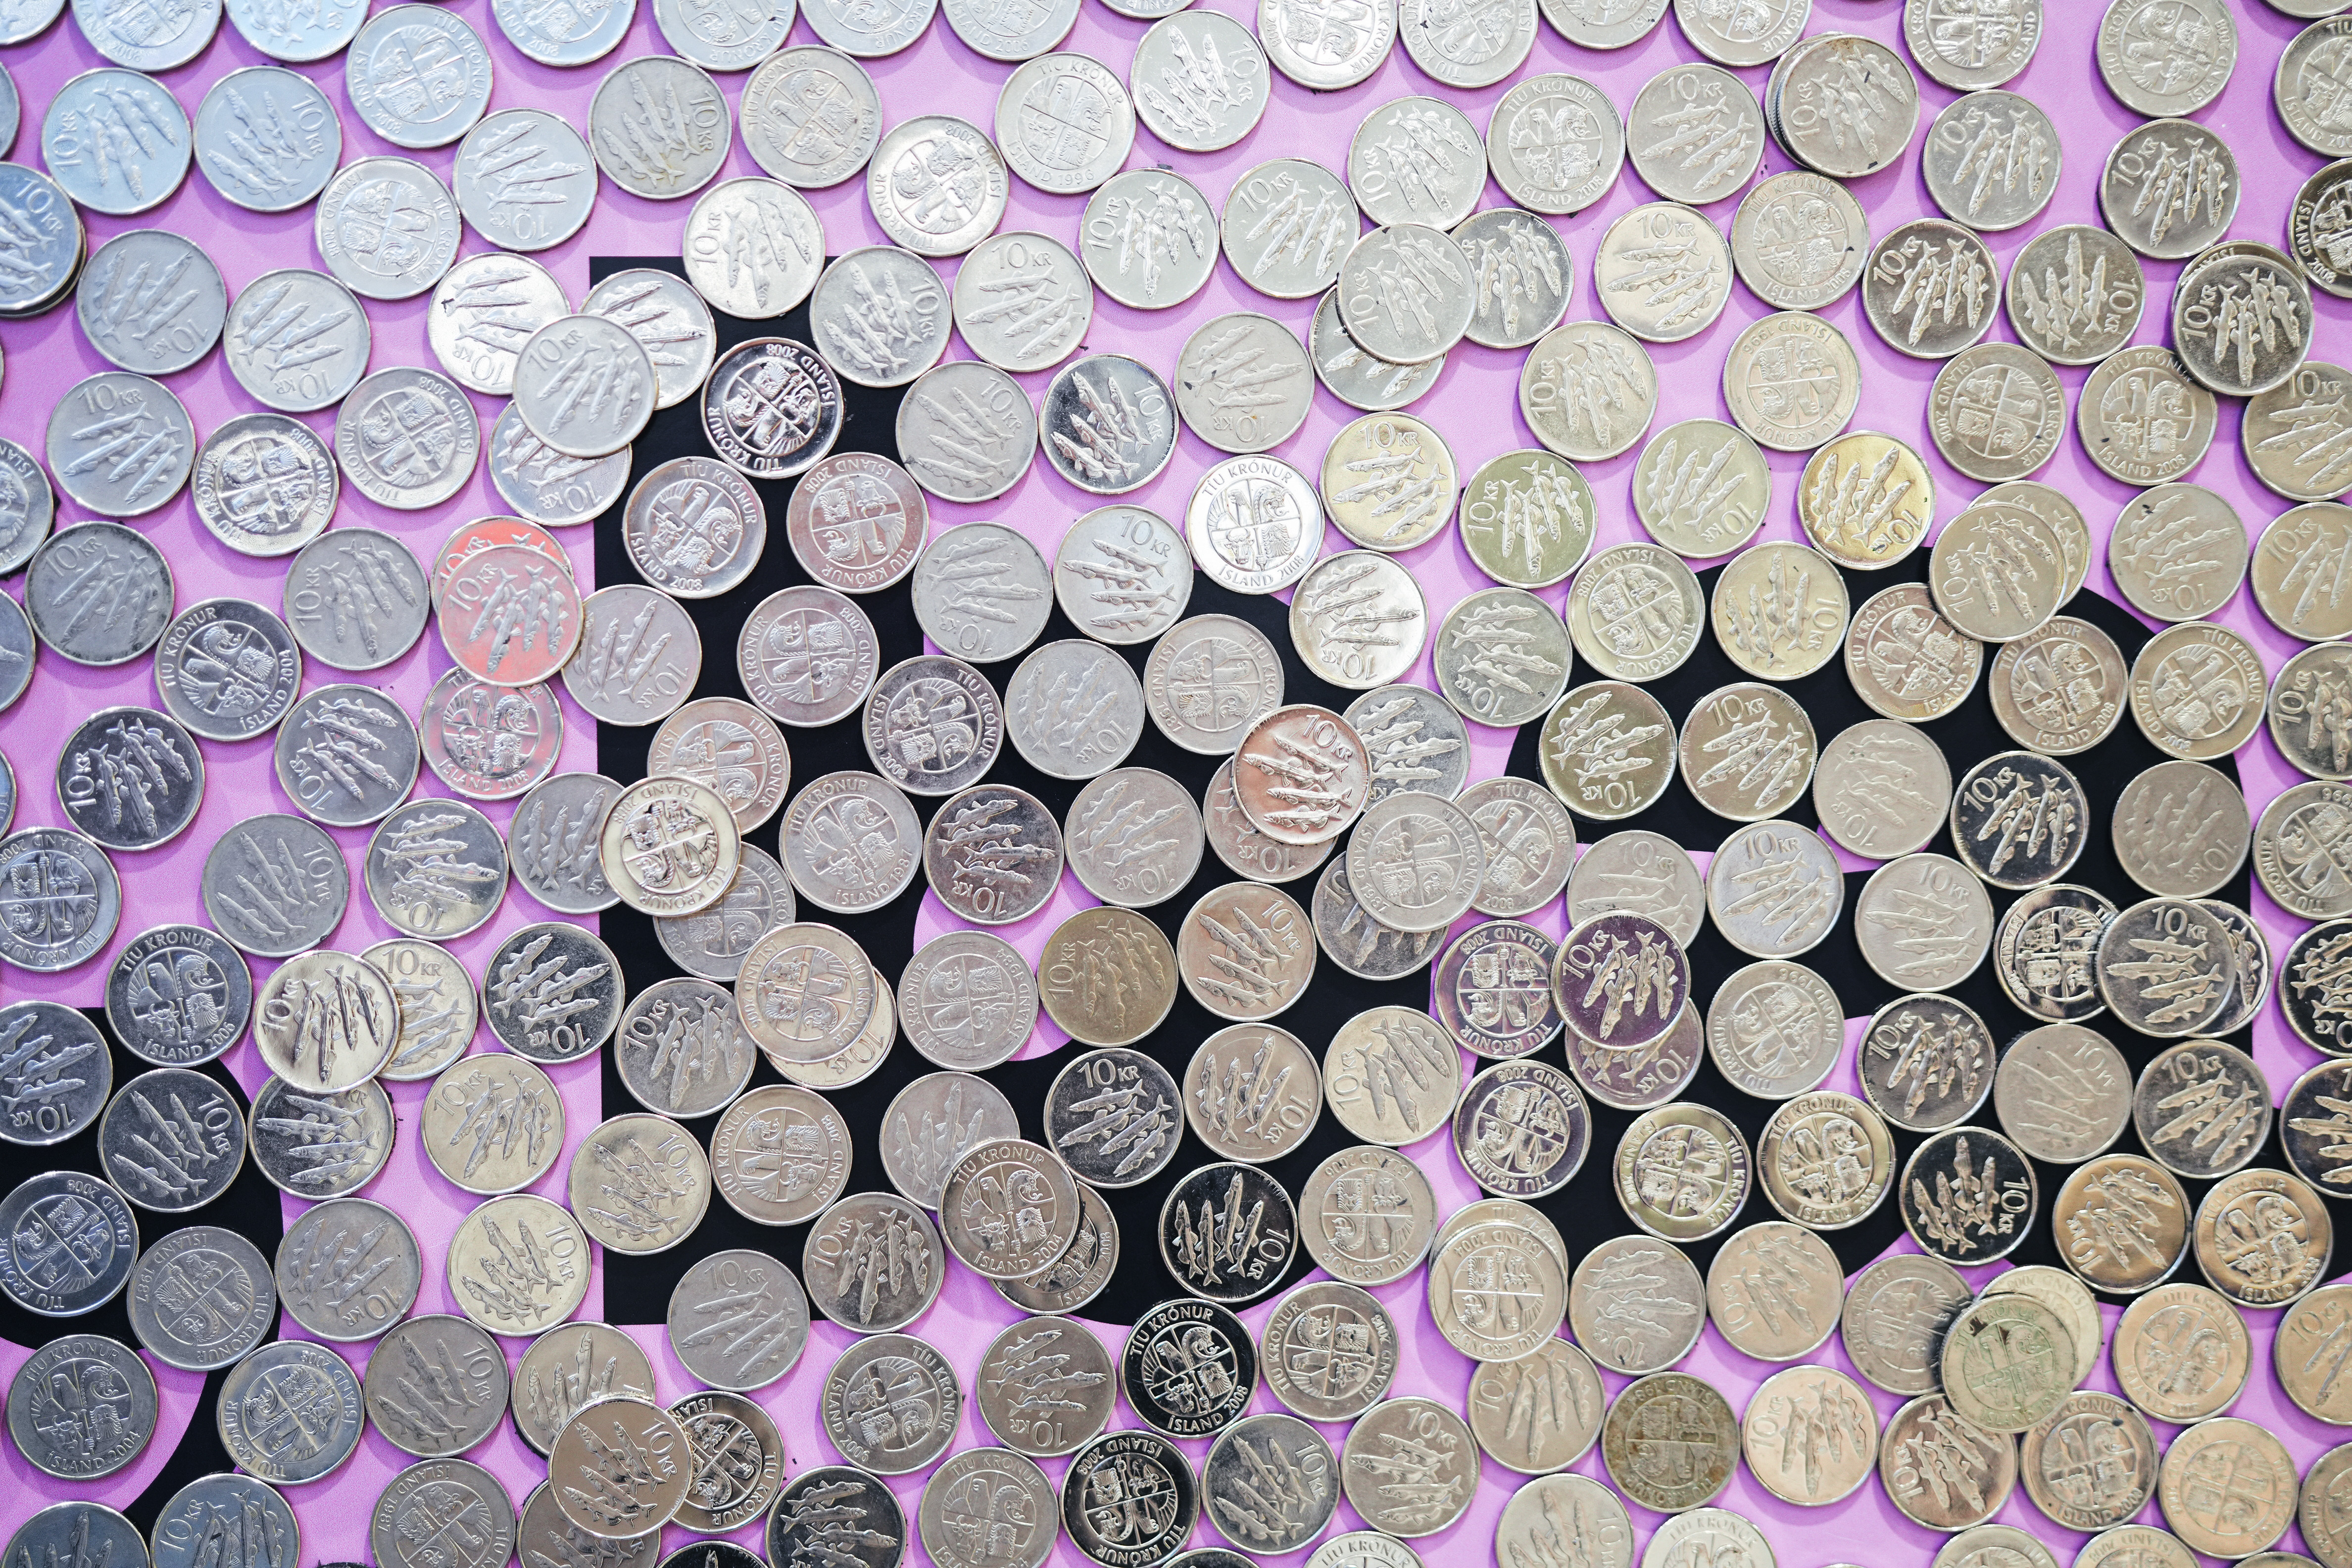 Photograph of coins on a table